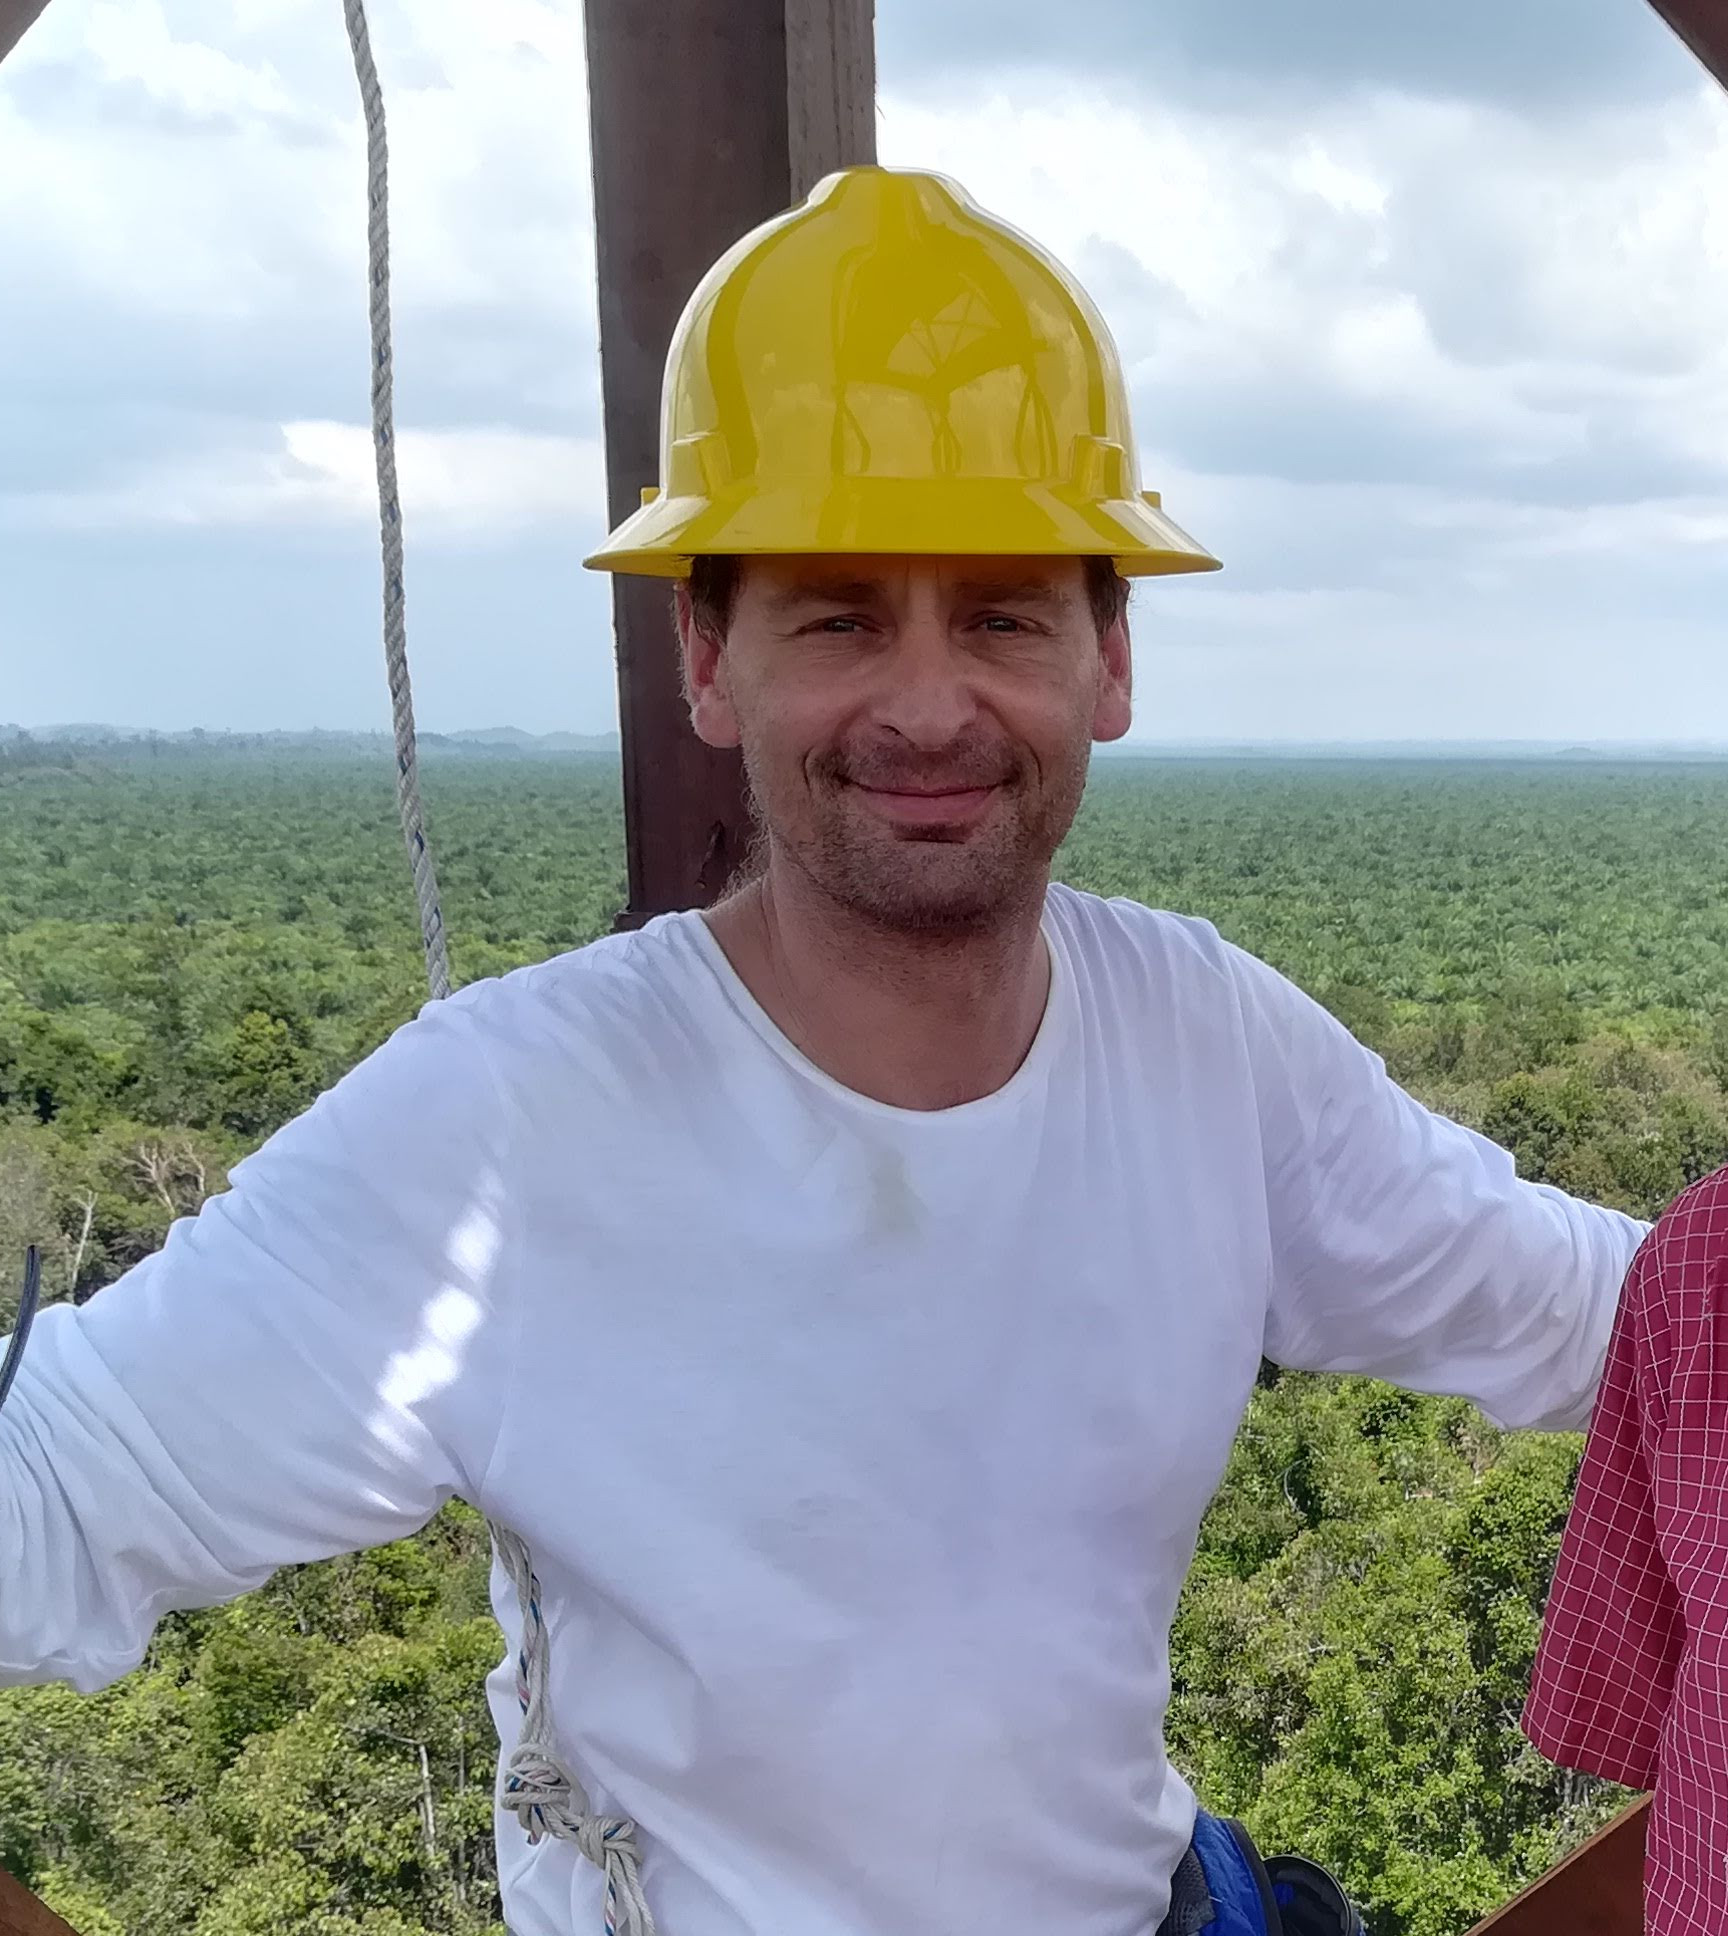 Jon McCalmont at the Malaysian Oil Palm sites